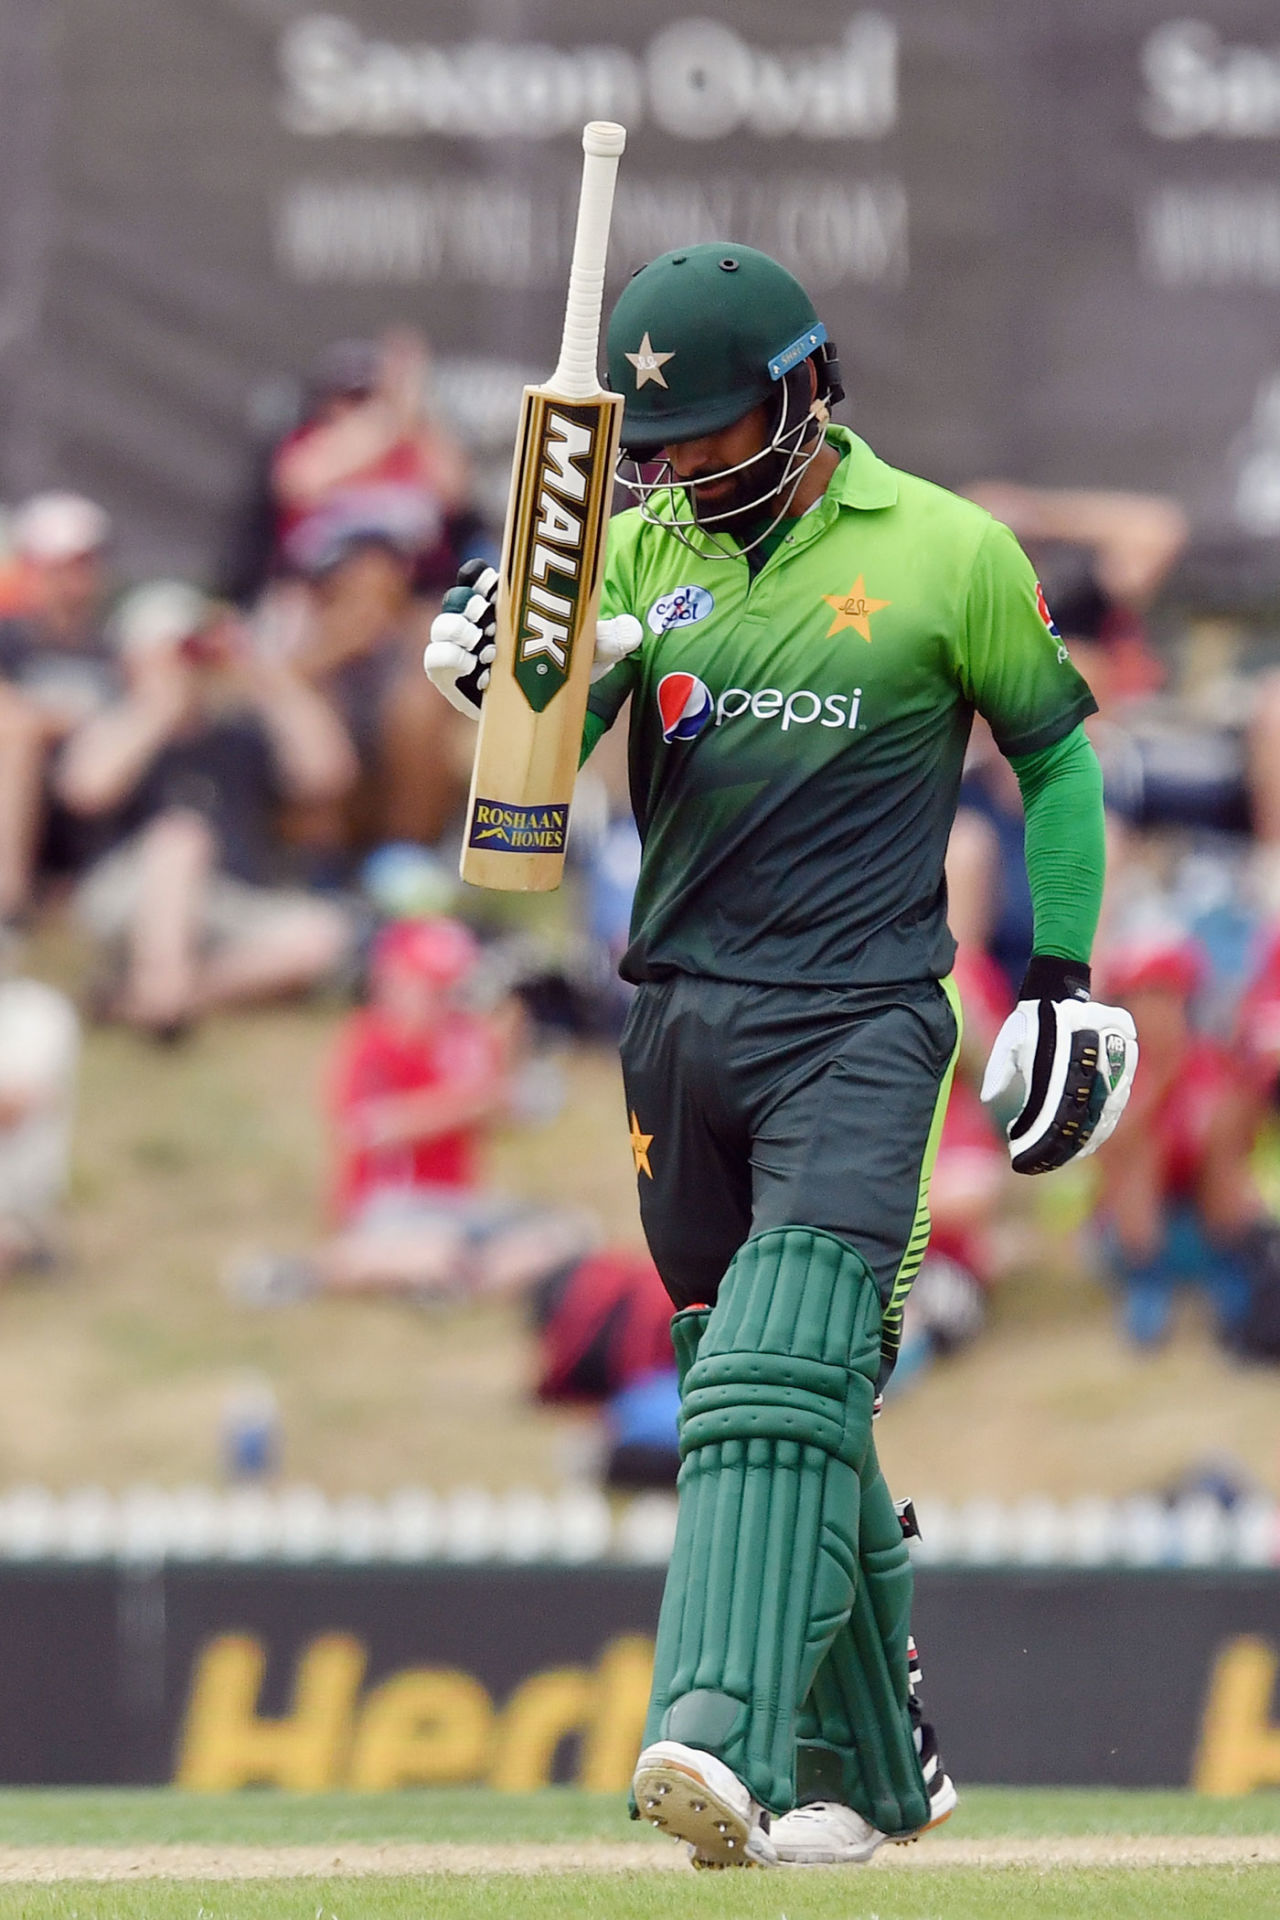 Mohammad Hafeez doesn't hide his disappointment after being dismissed, New Zealand v Pakistan, 2nd ODI, Nelson, January 9, 2018